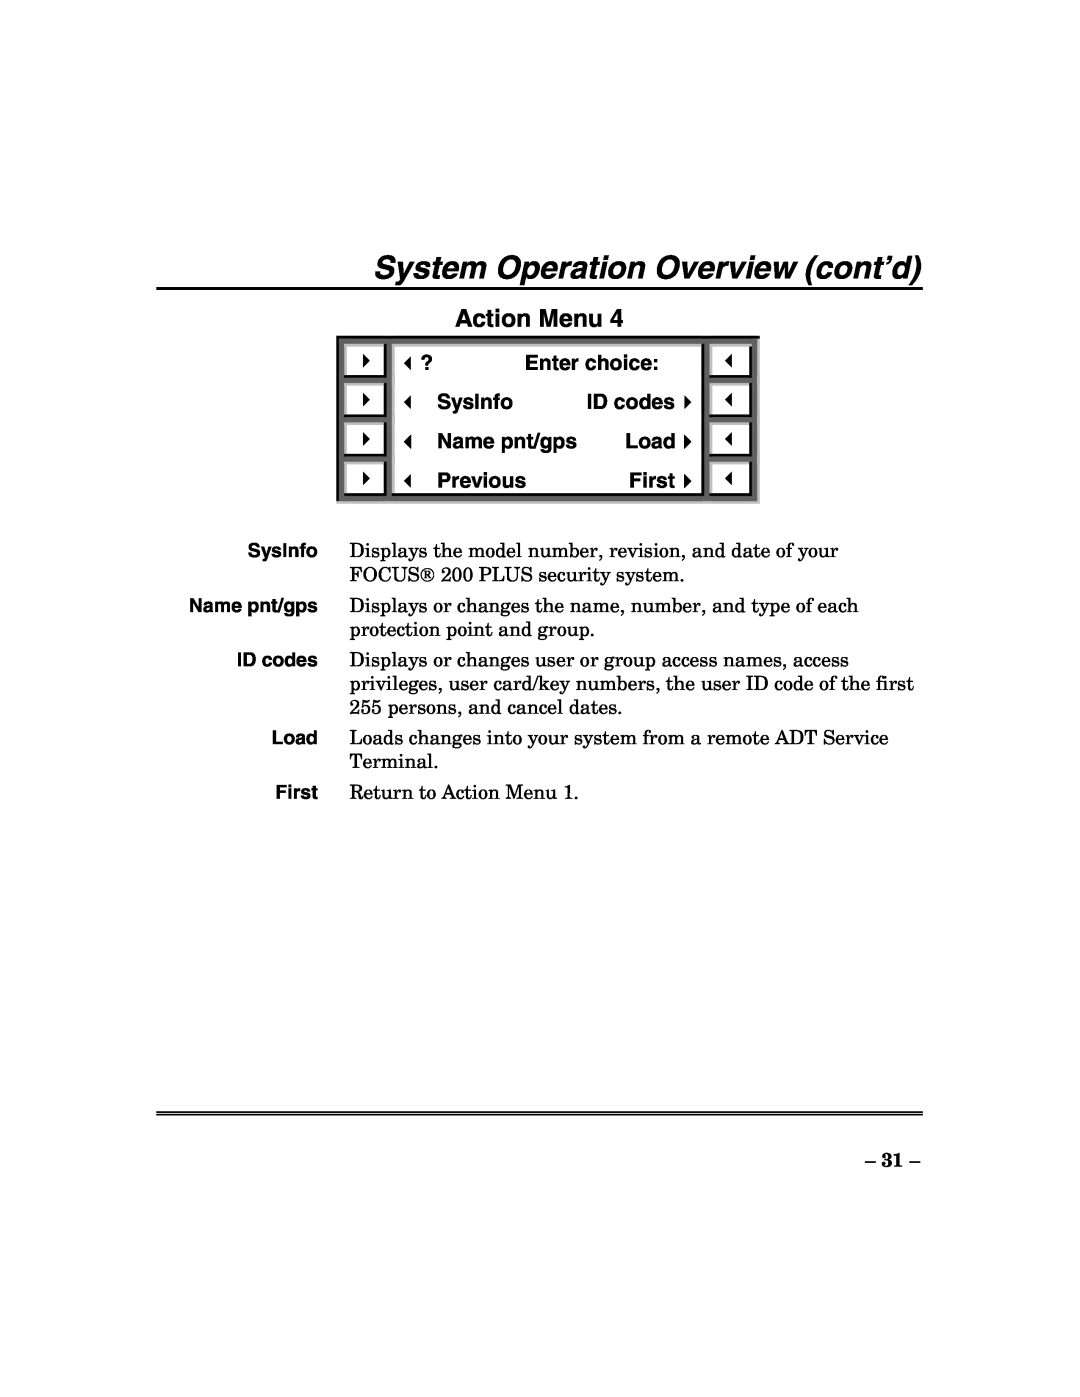 ADT Security Services 200 Plus System Operation Overview cont’d, Action Menu, Enter choice, SysInfo, ID codes, Load, First 